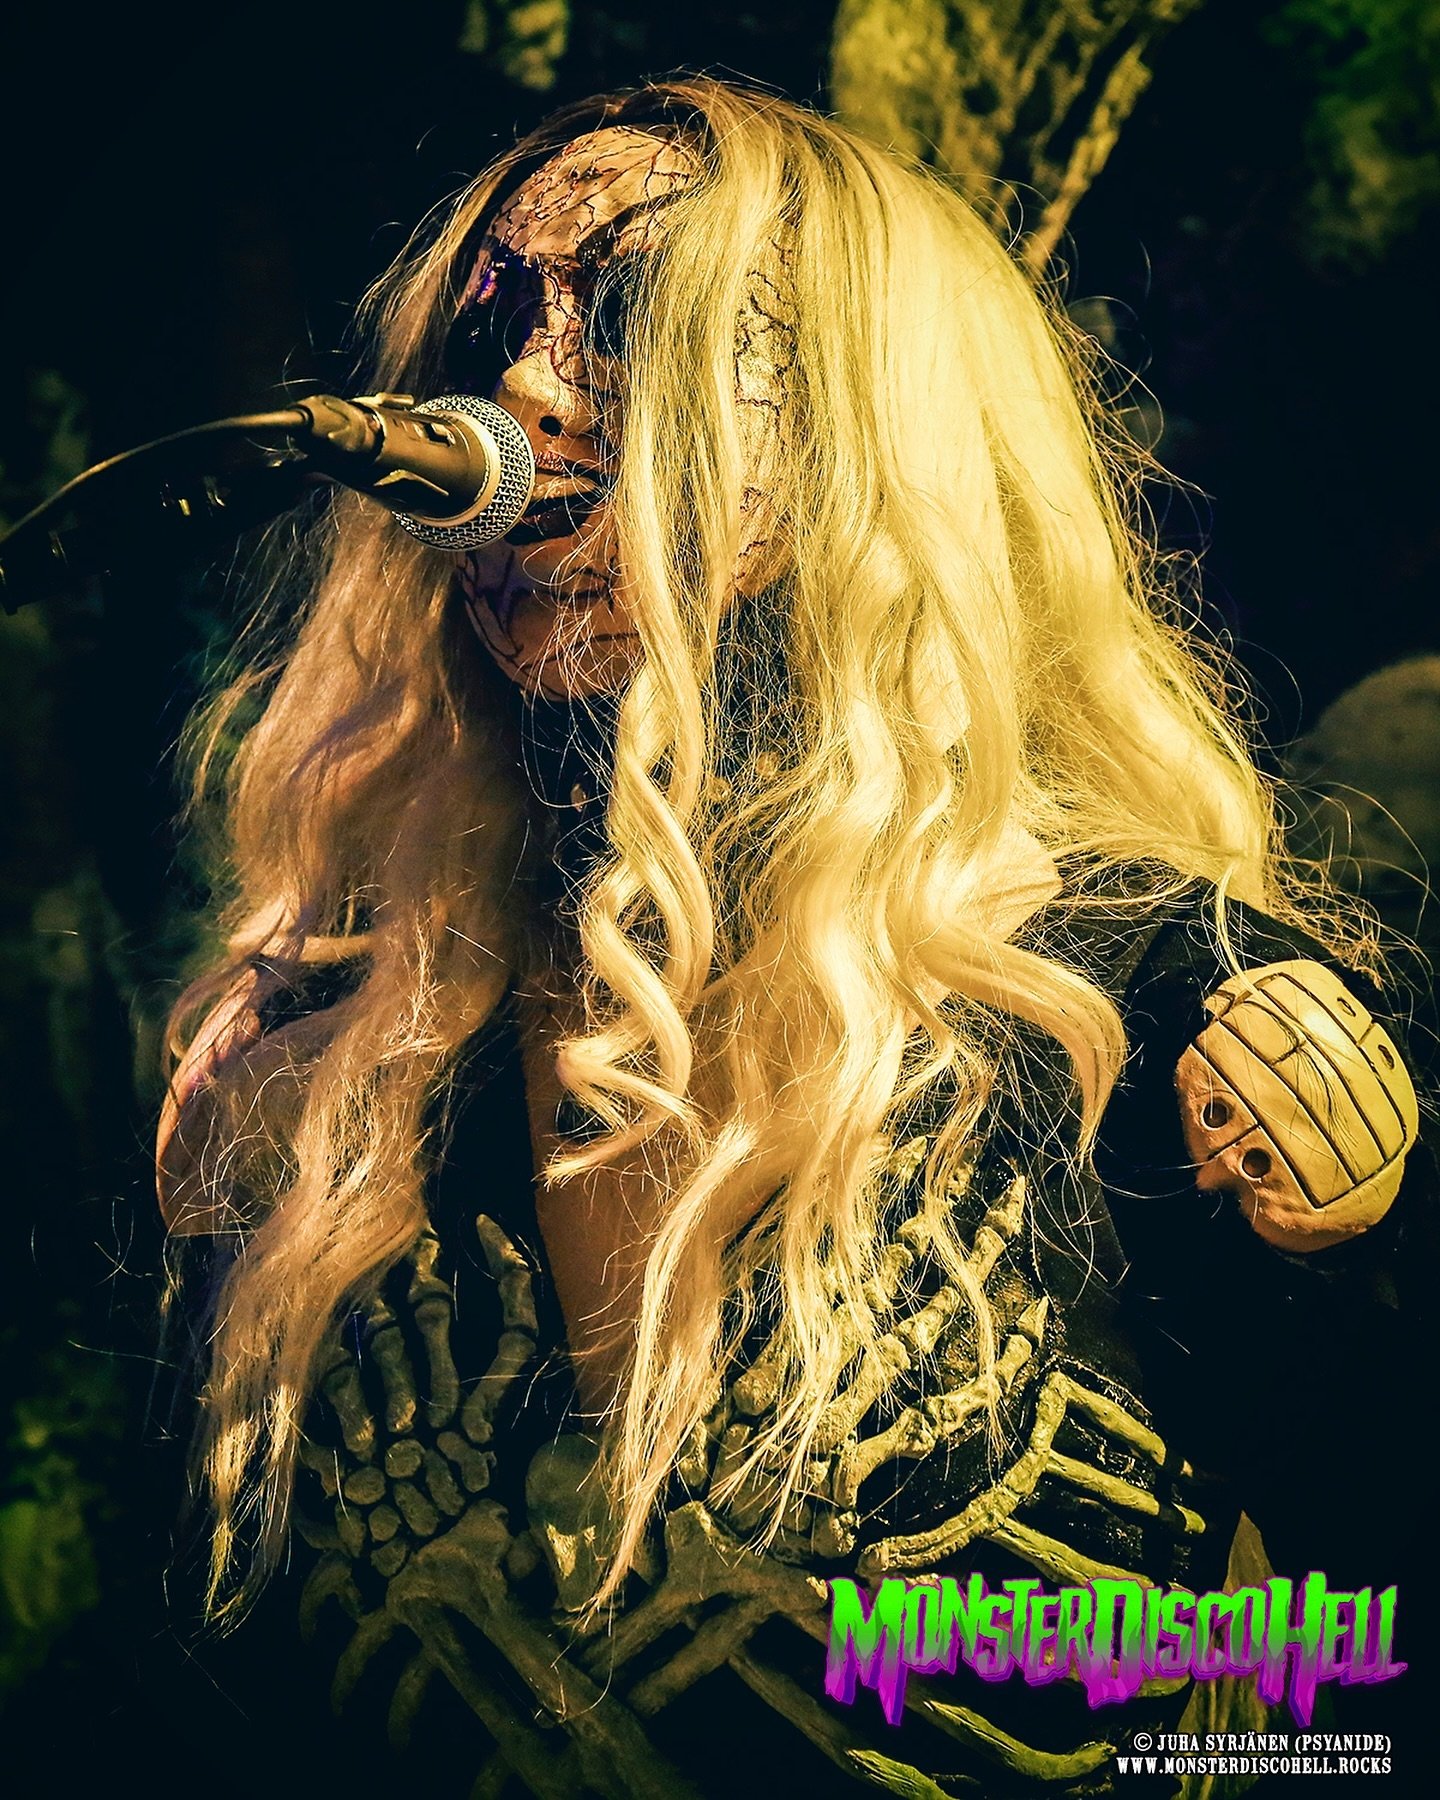 It&rsquo;s almost weekend, monstermaniacs! Hang in there just a little longer! Let&rsquo;s make this Friday Hella Good with this previously unused shot of Hella singing her heart out at Helsinki Ice Hall on May 19th 2023. The UNLIVING PICTOUR SHOW he